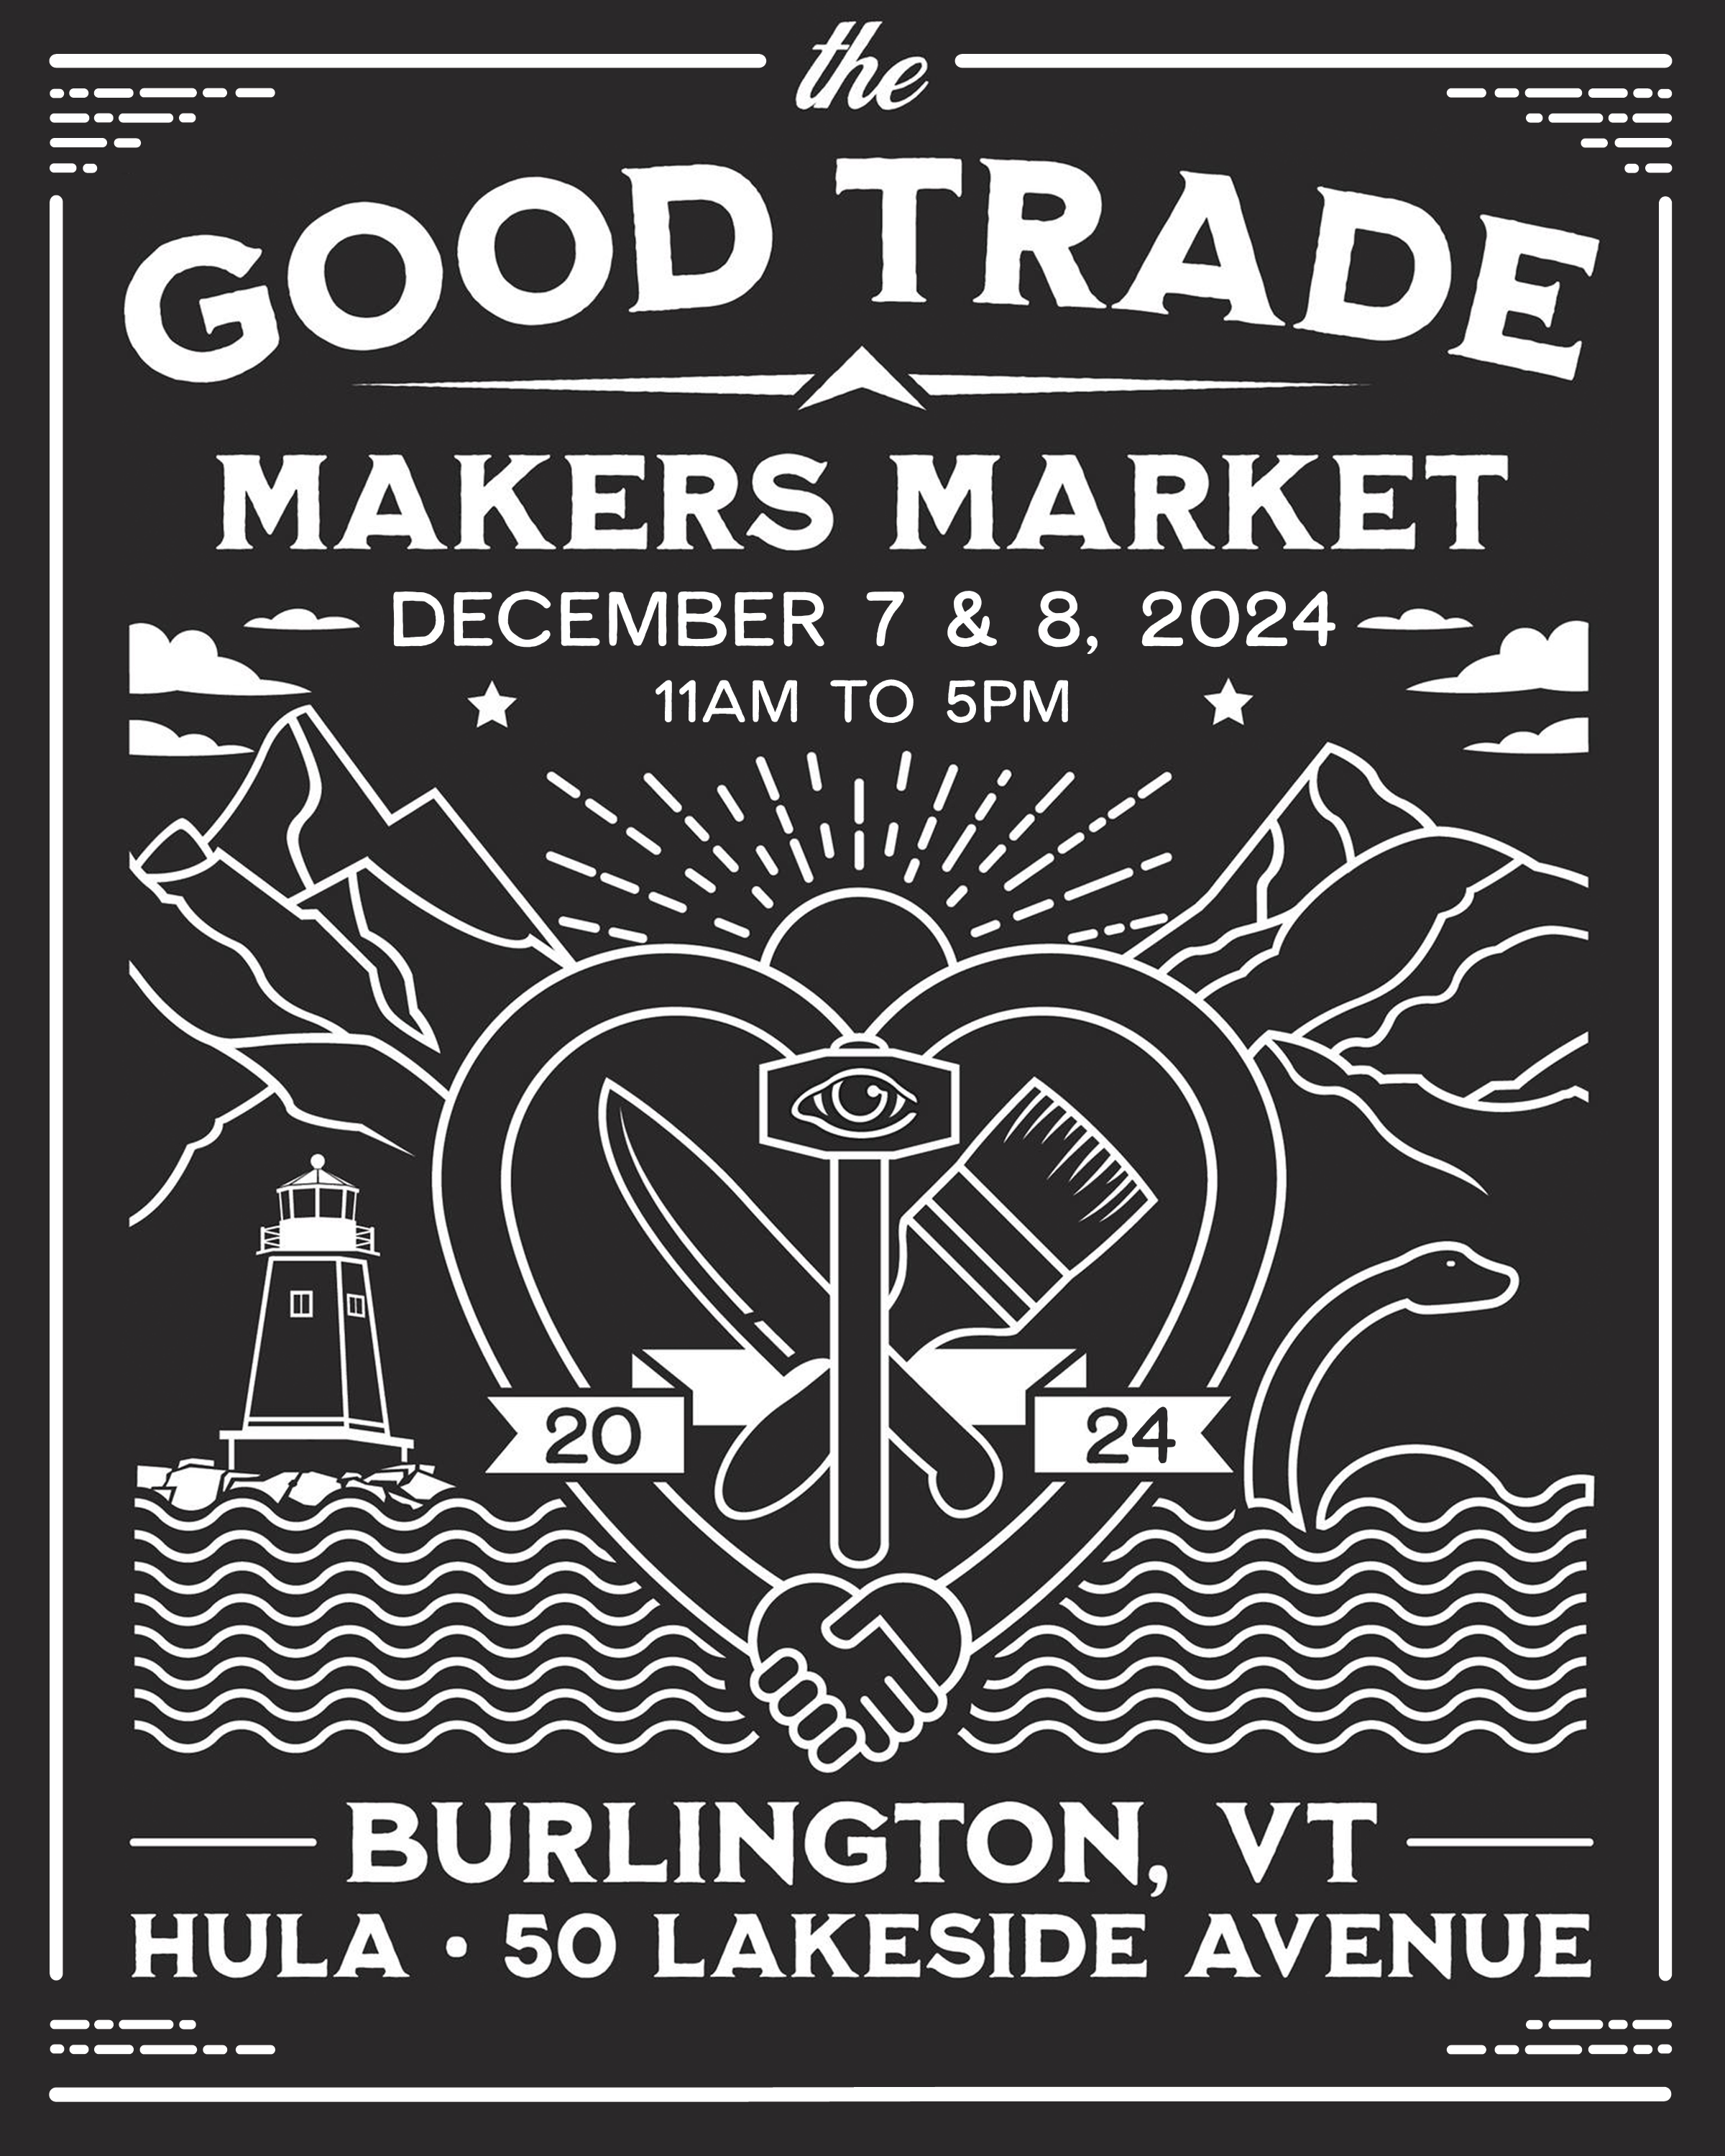 Event Poster for The Good Trade Makers Market 2024